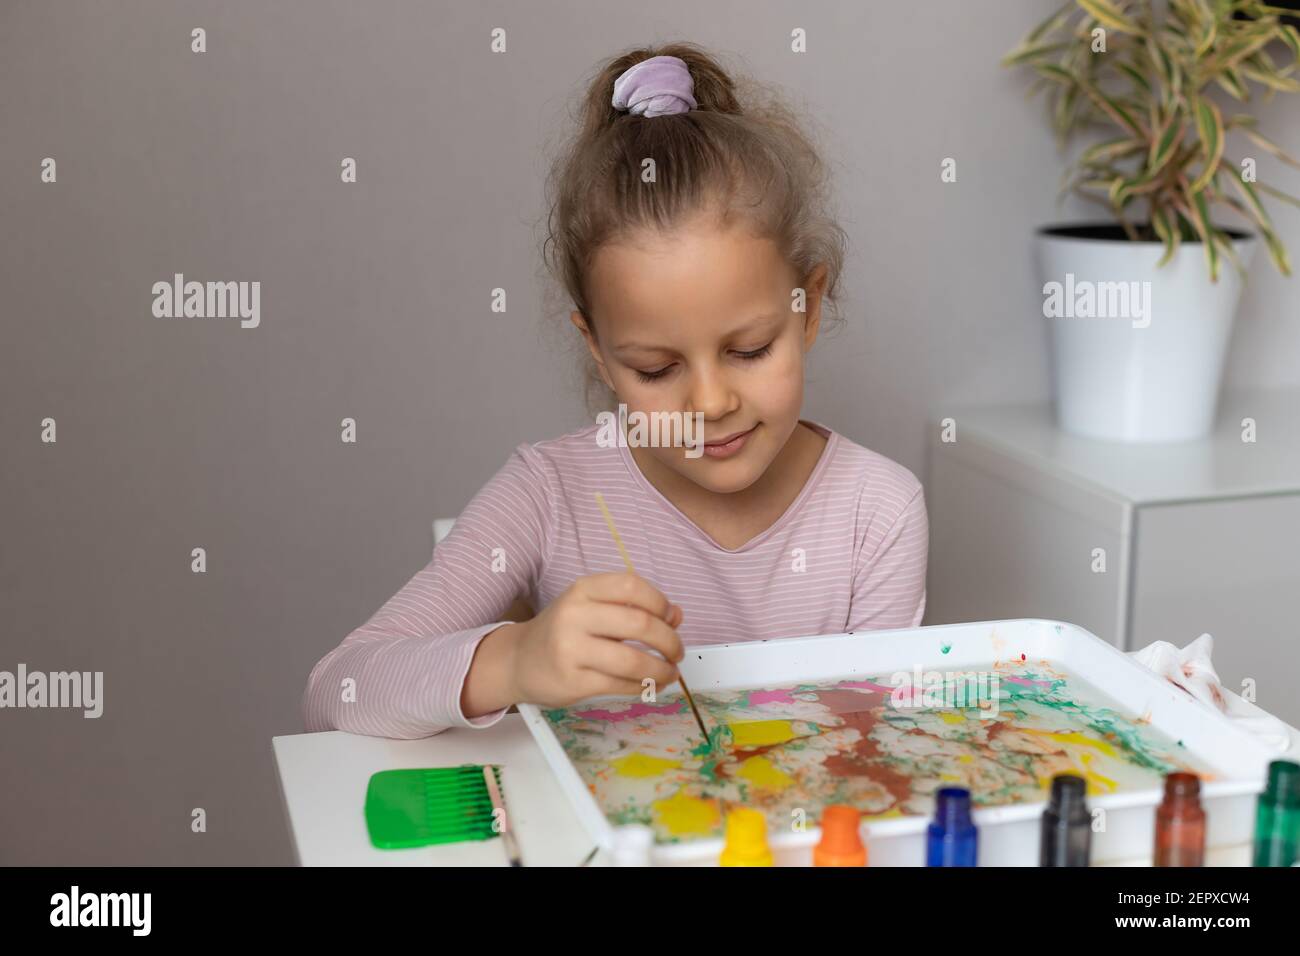 preschooler girl painting with paints on water Stock Photo